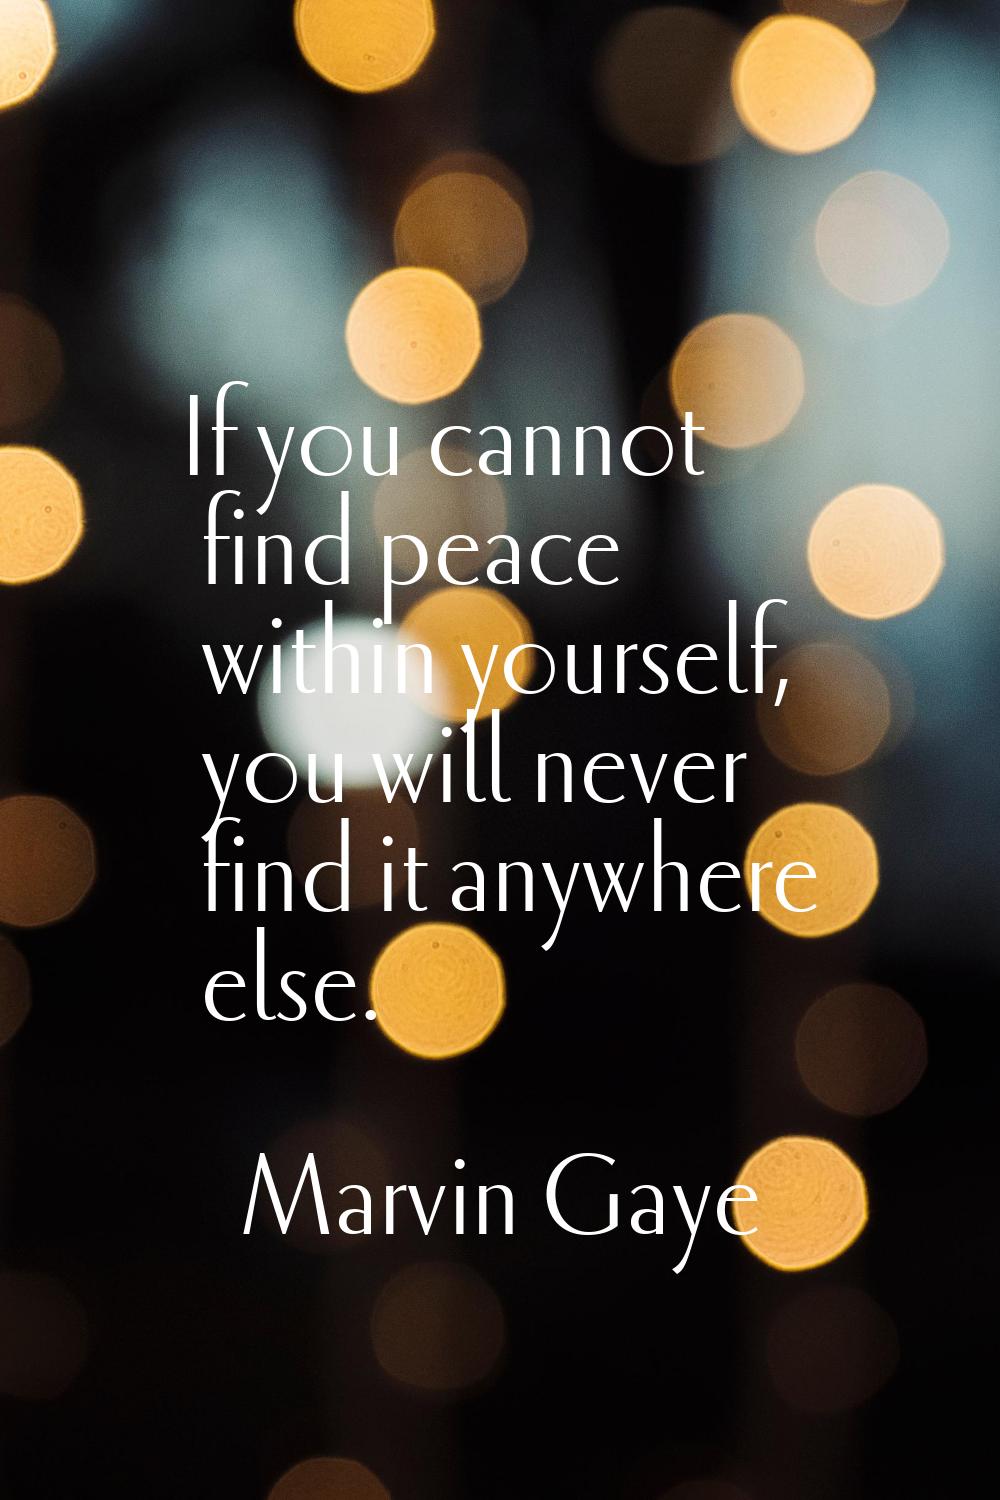 If you cannot find peace within yourself, you will never find it anywhere else.